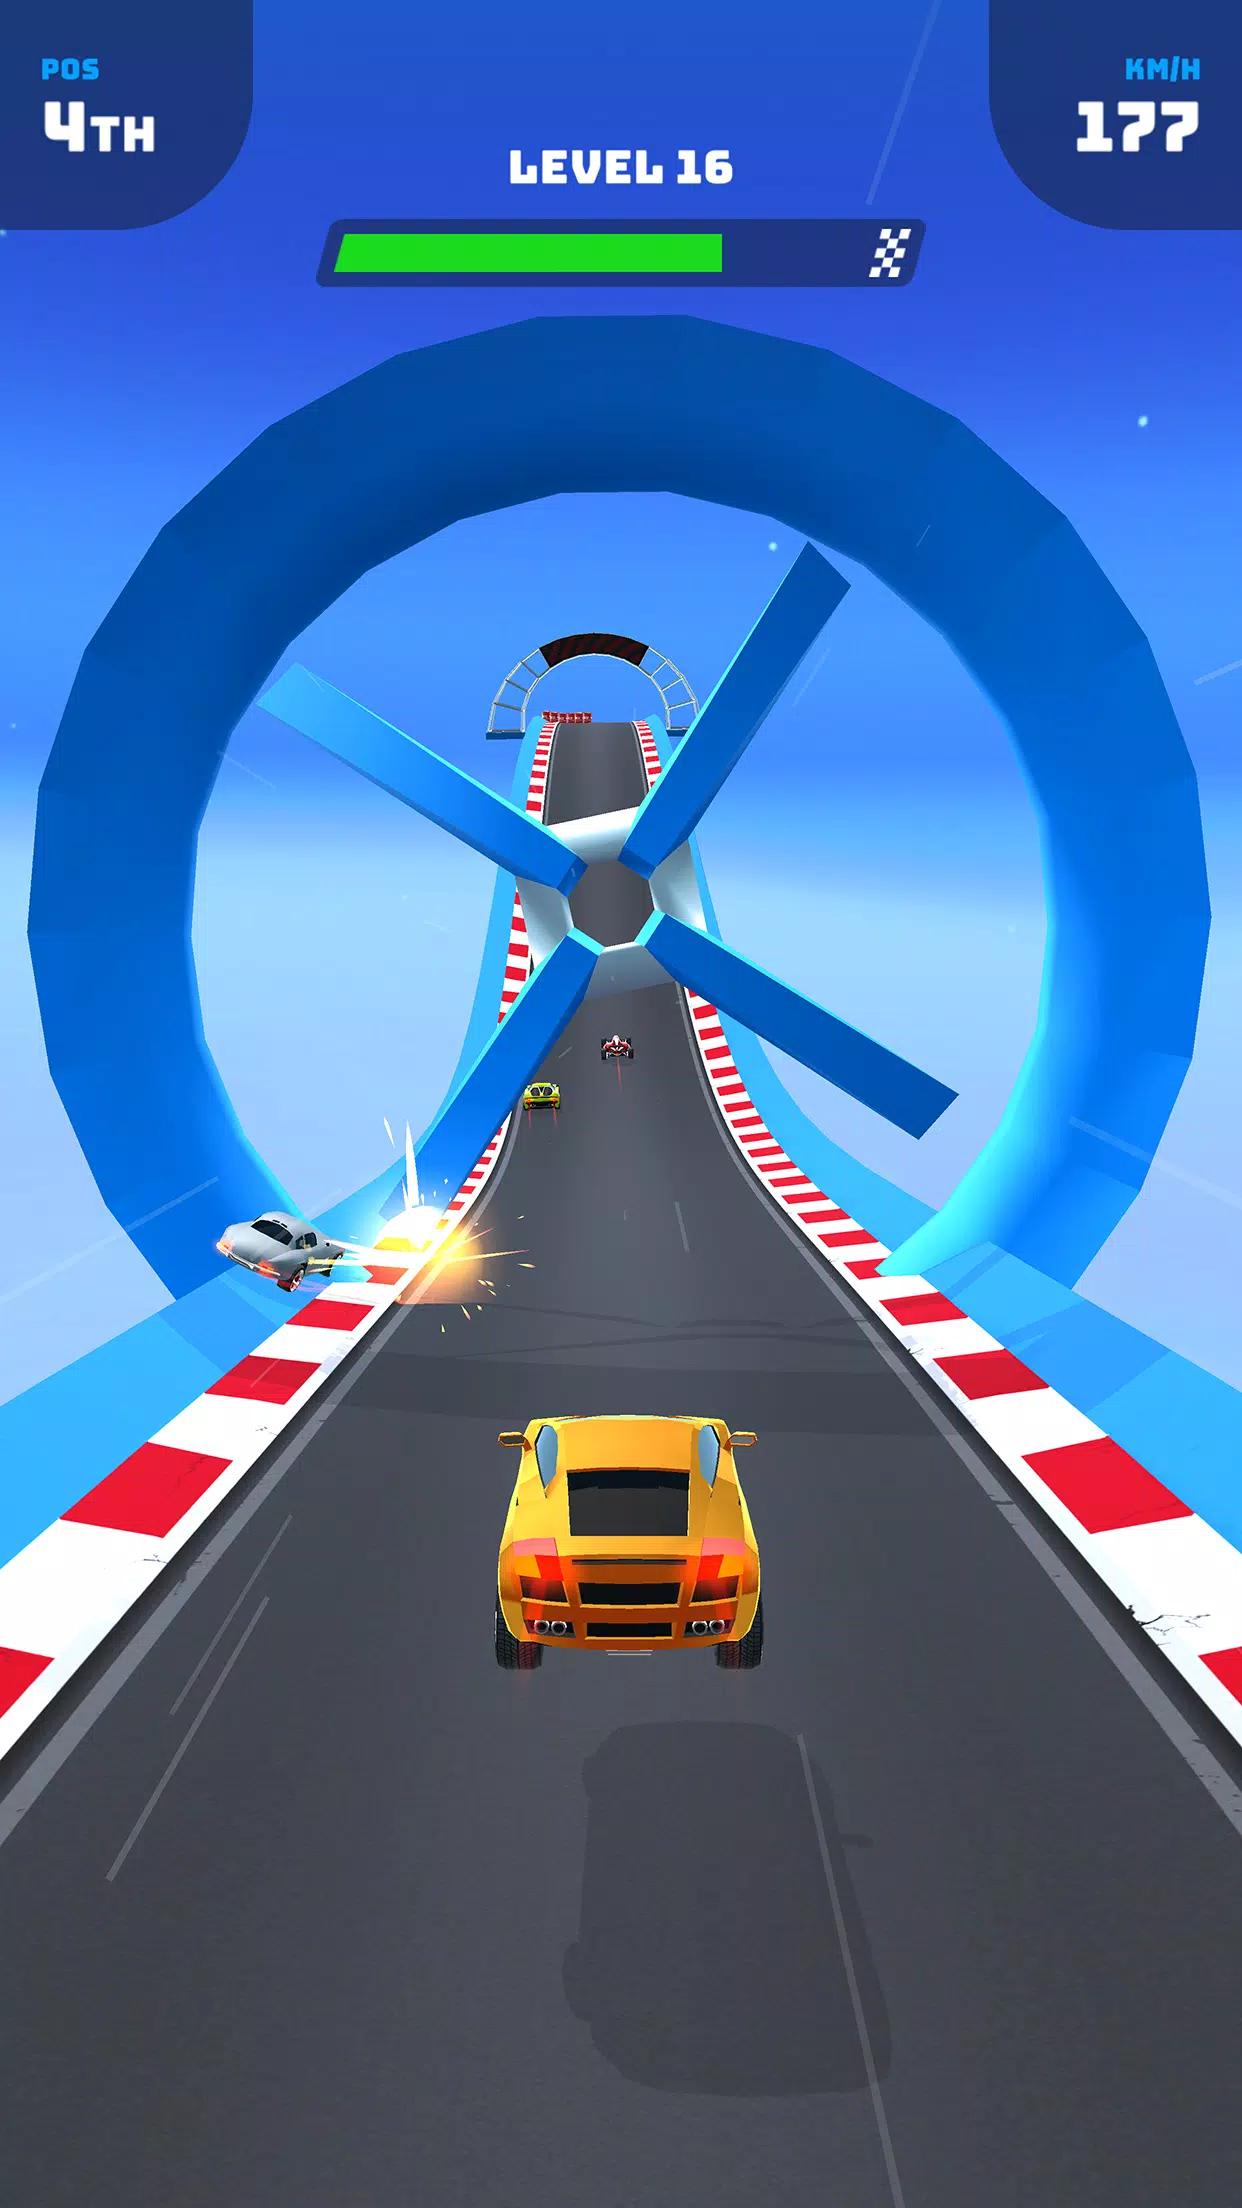 Racing Master APK (Android Game) - Free Download